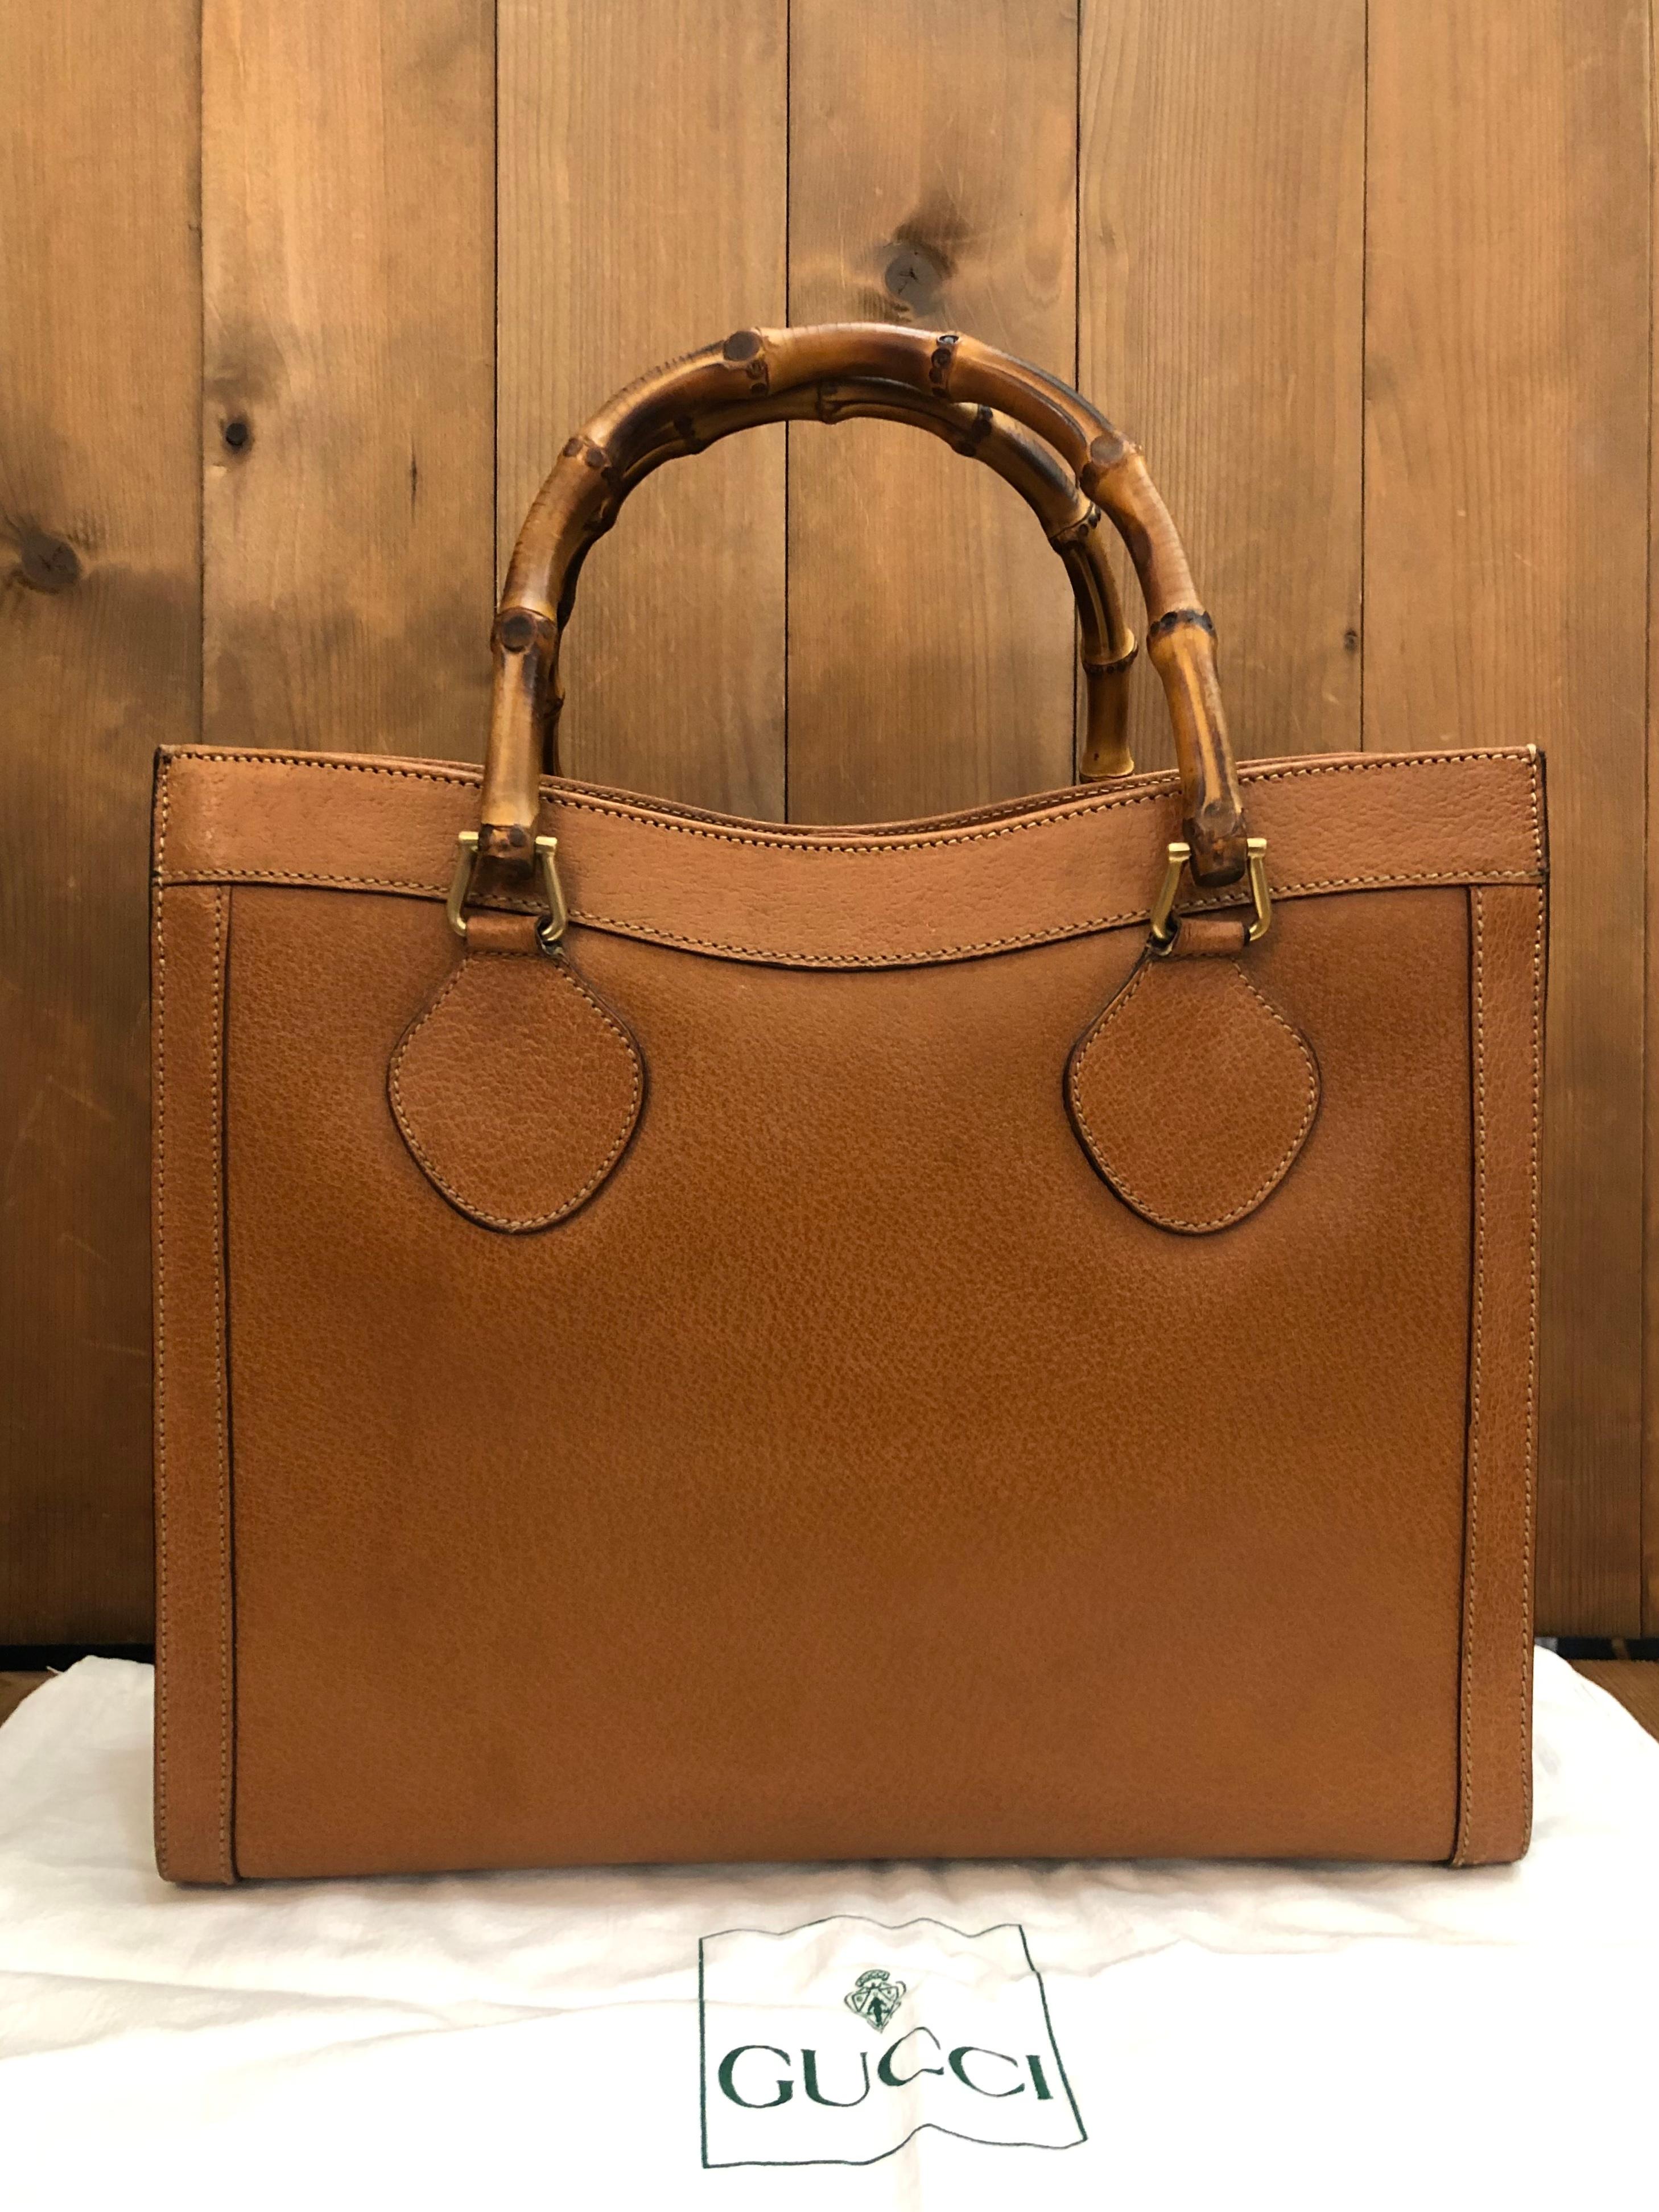 Women's or Men's Vintage GUCCI Diana Tote Bamboo Tote Bag Leather Caramel (Medium)